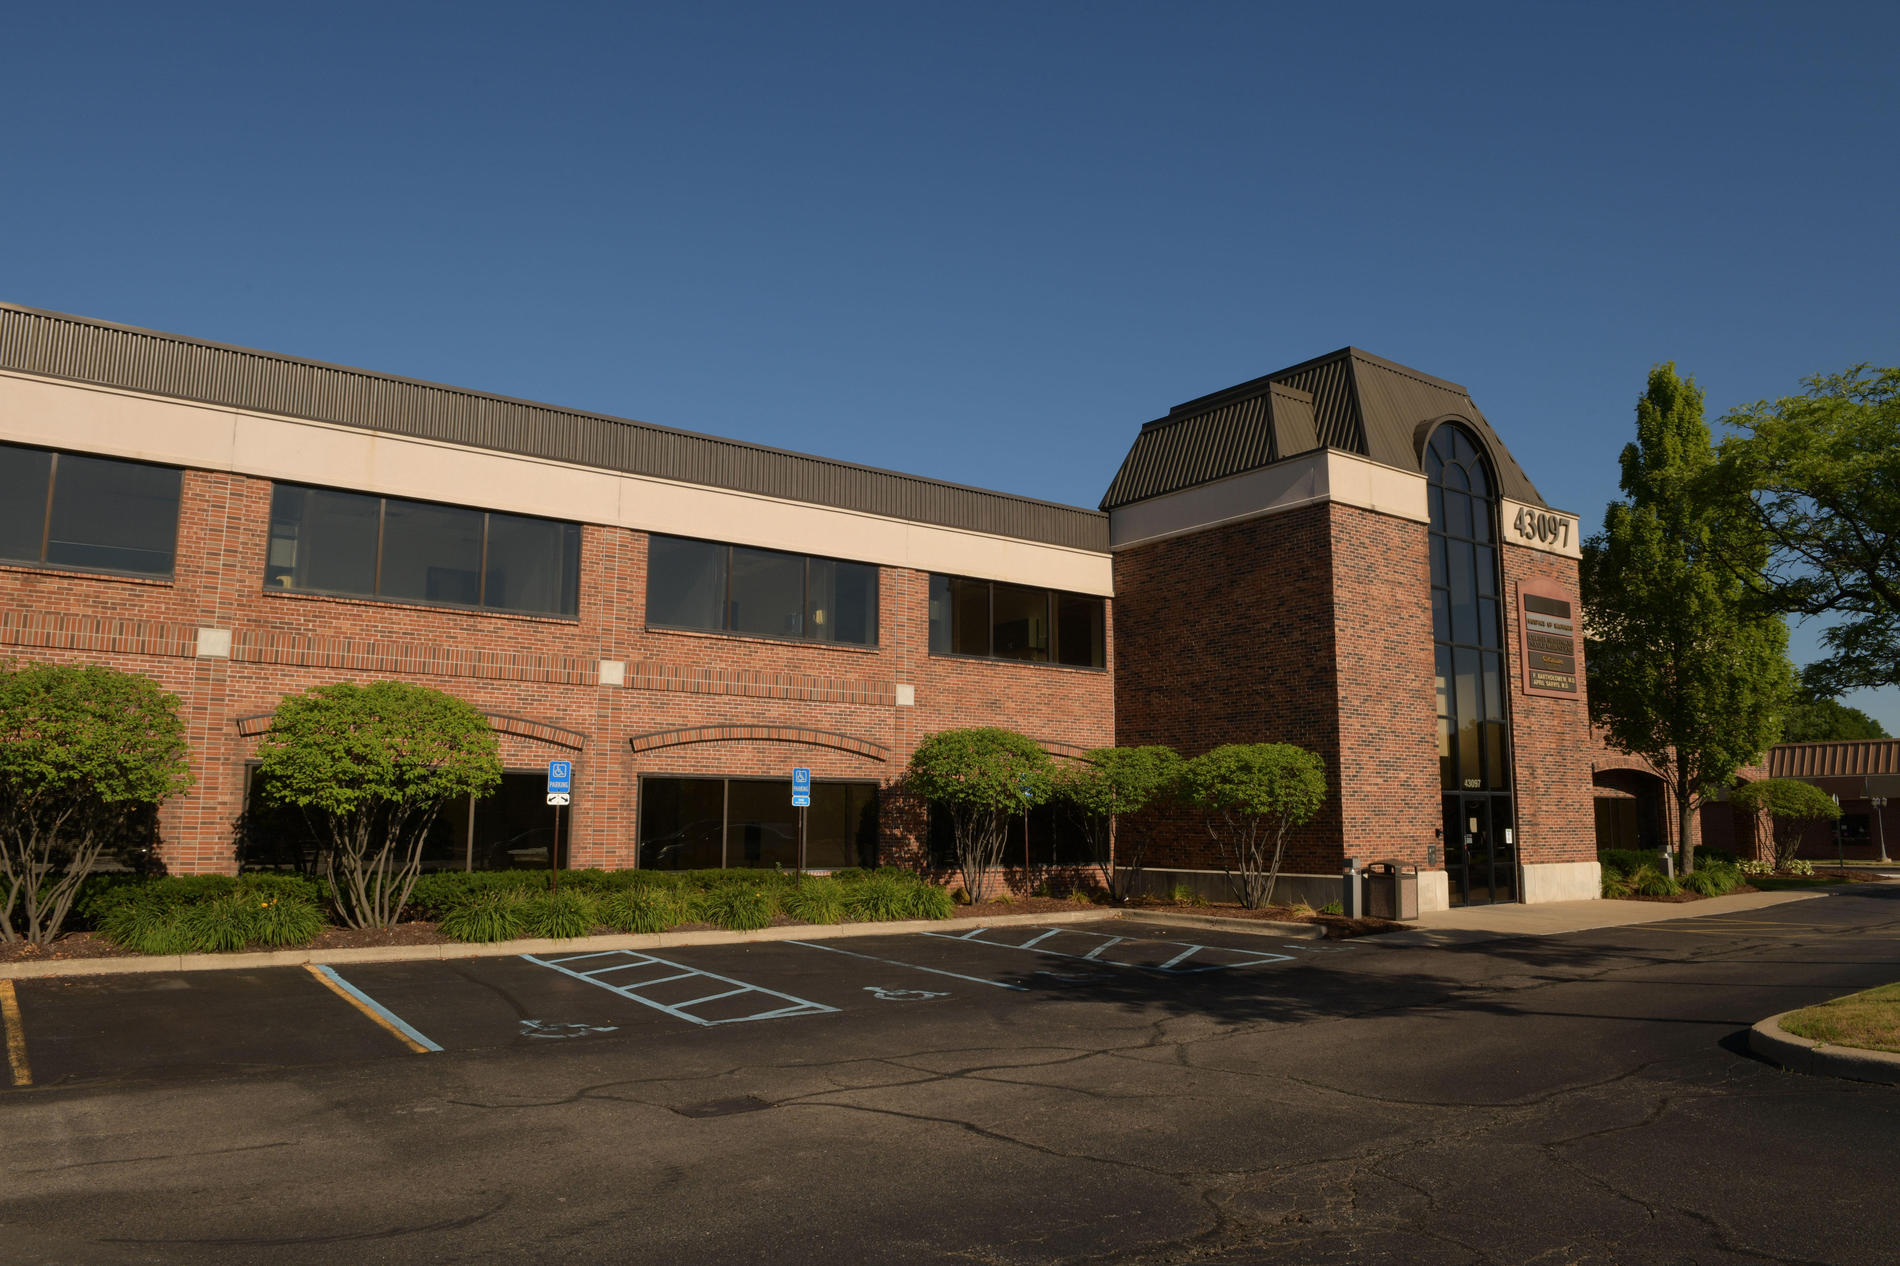 A photo of a 2-story brick office building at 43097 Woodward Ave. in Bloomfield, Michigan.